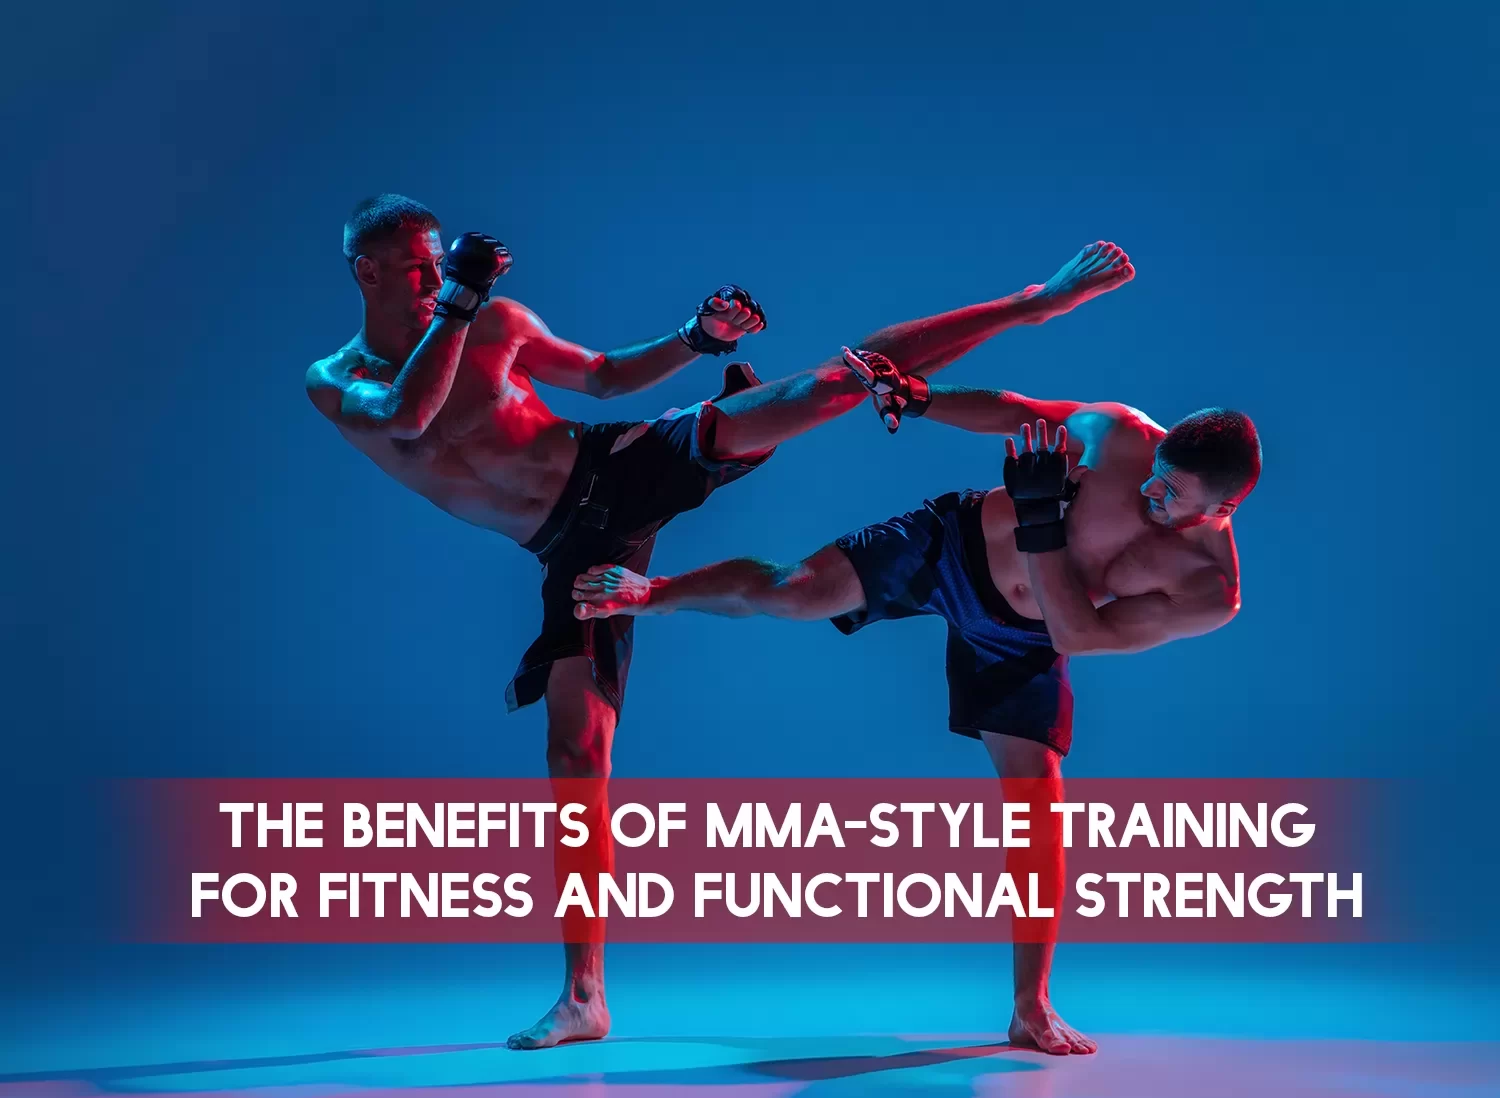 MMA-style Training for Fitness